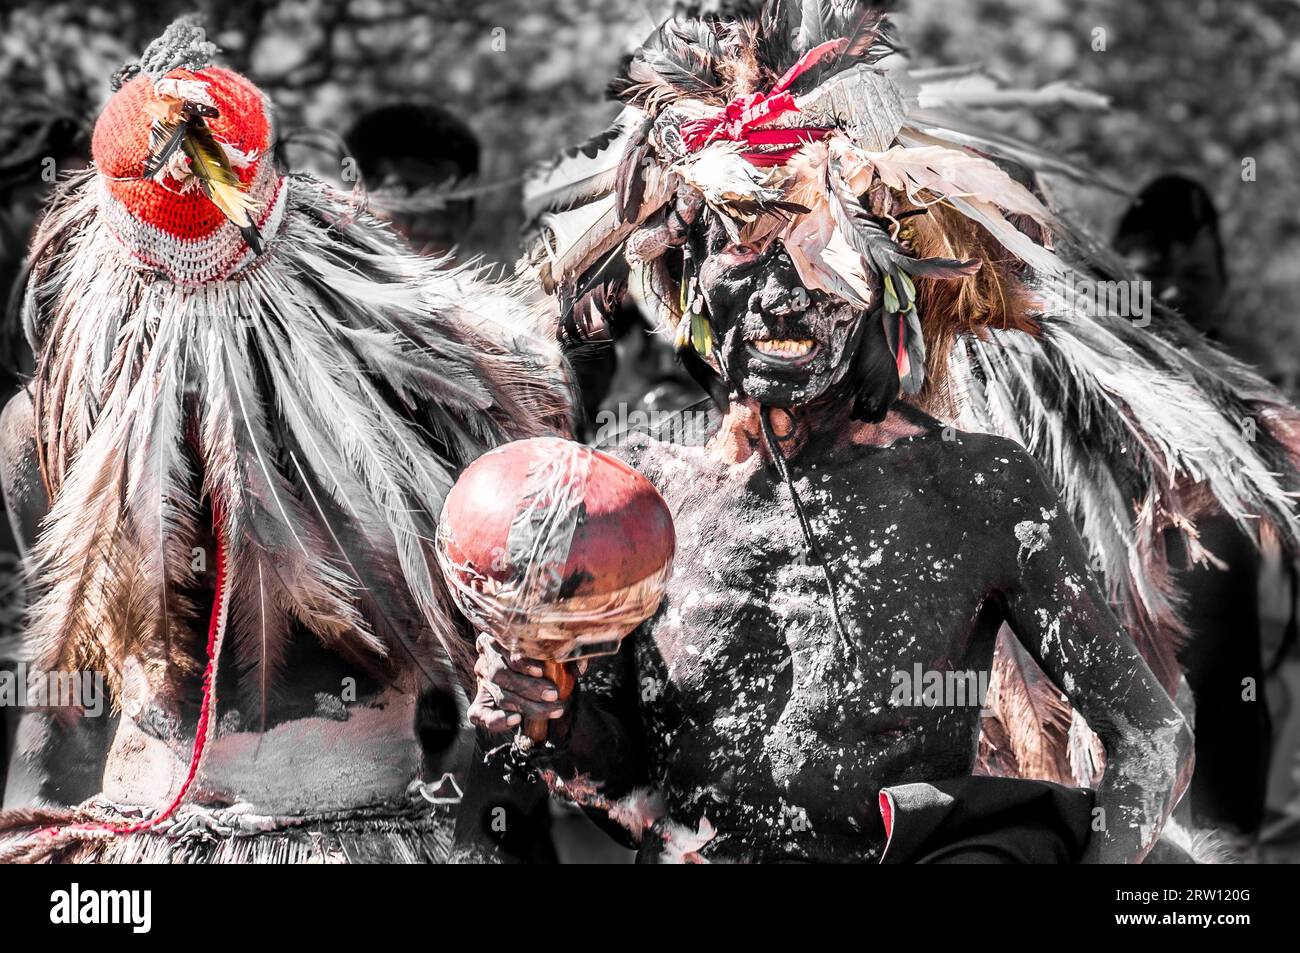 Puerto Pollo, Paraguay on August 8, 2015: Indigenous men perform a traditional ceremony using feathers and black body paint to symbolize a jaguar Stock Photo